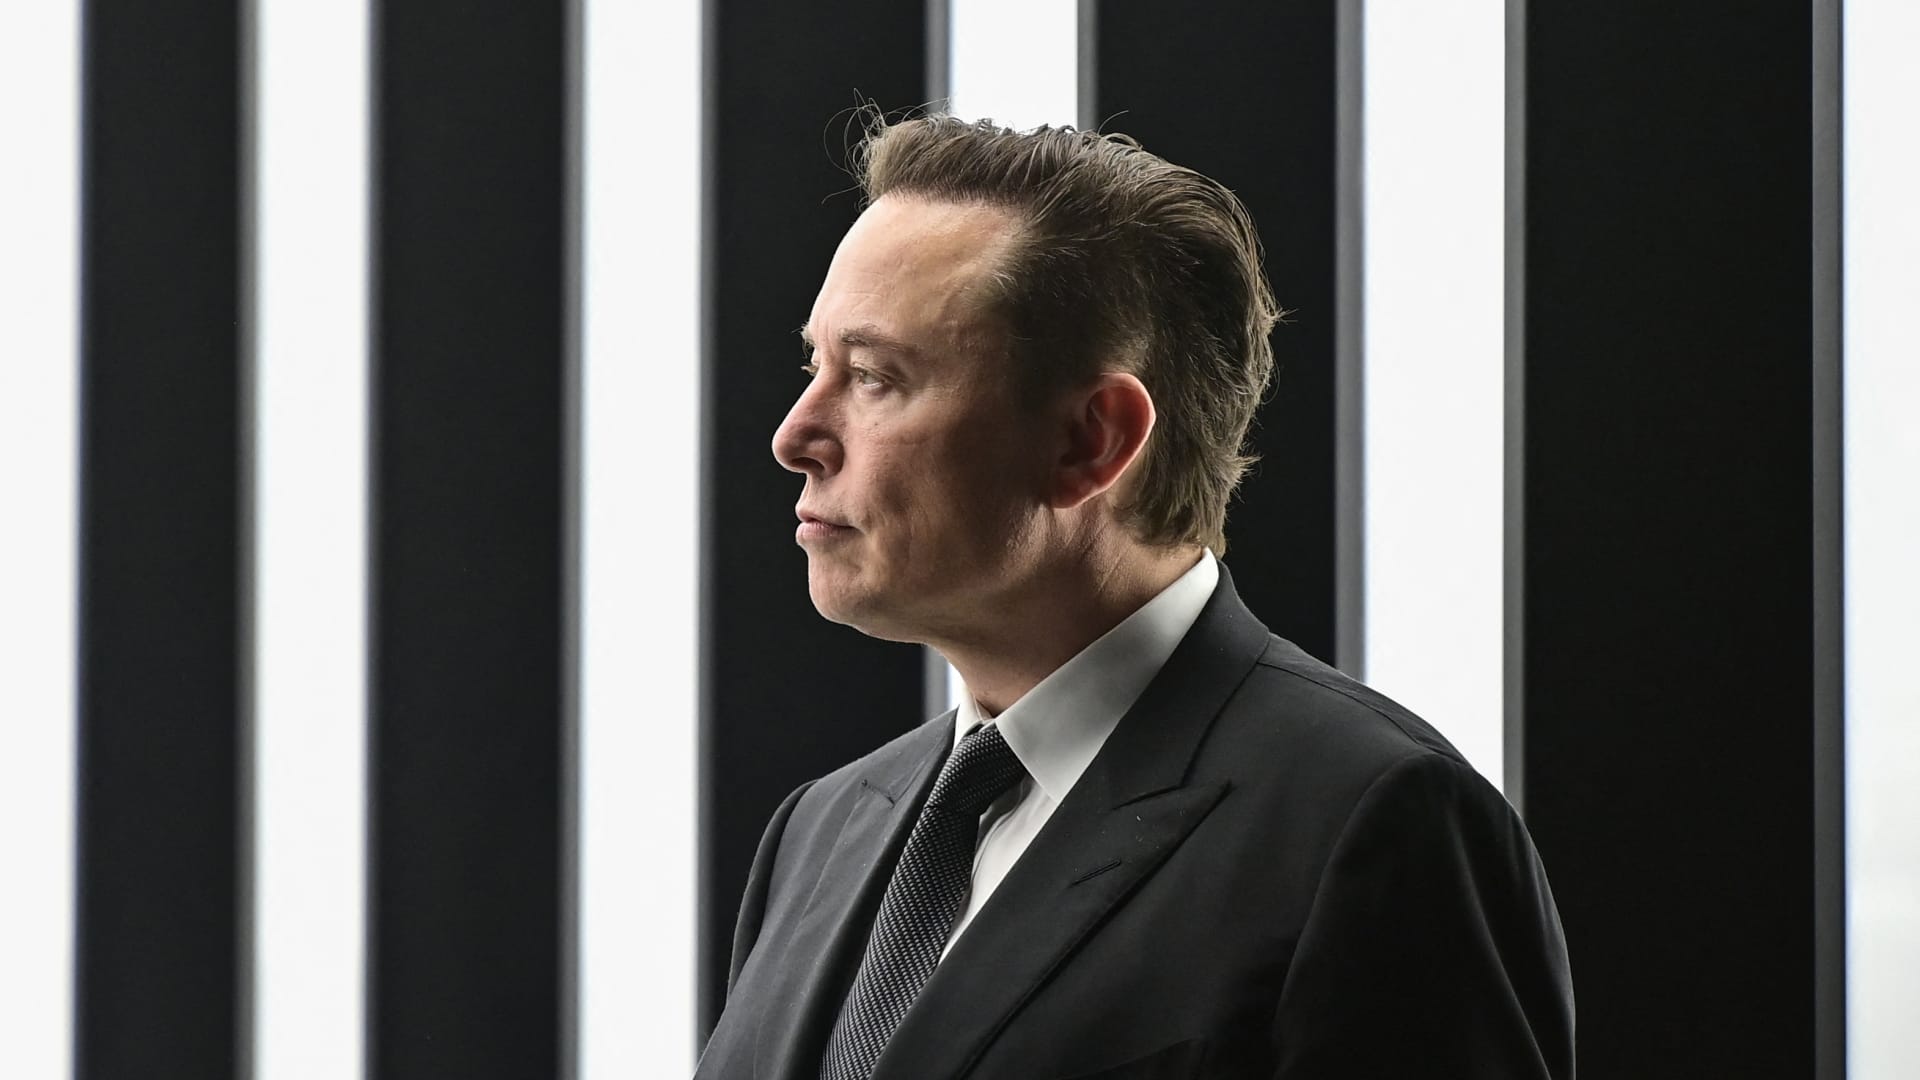 CNBC Daily Open: It’s all about Elon Musk